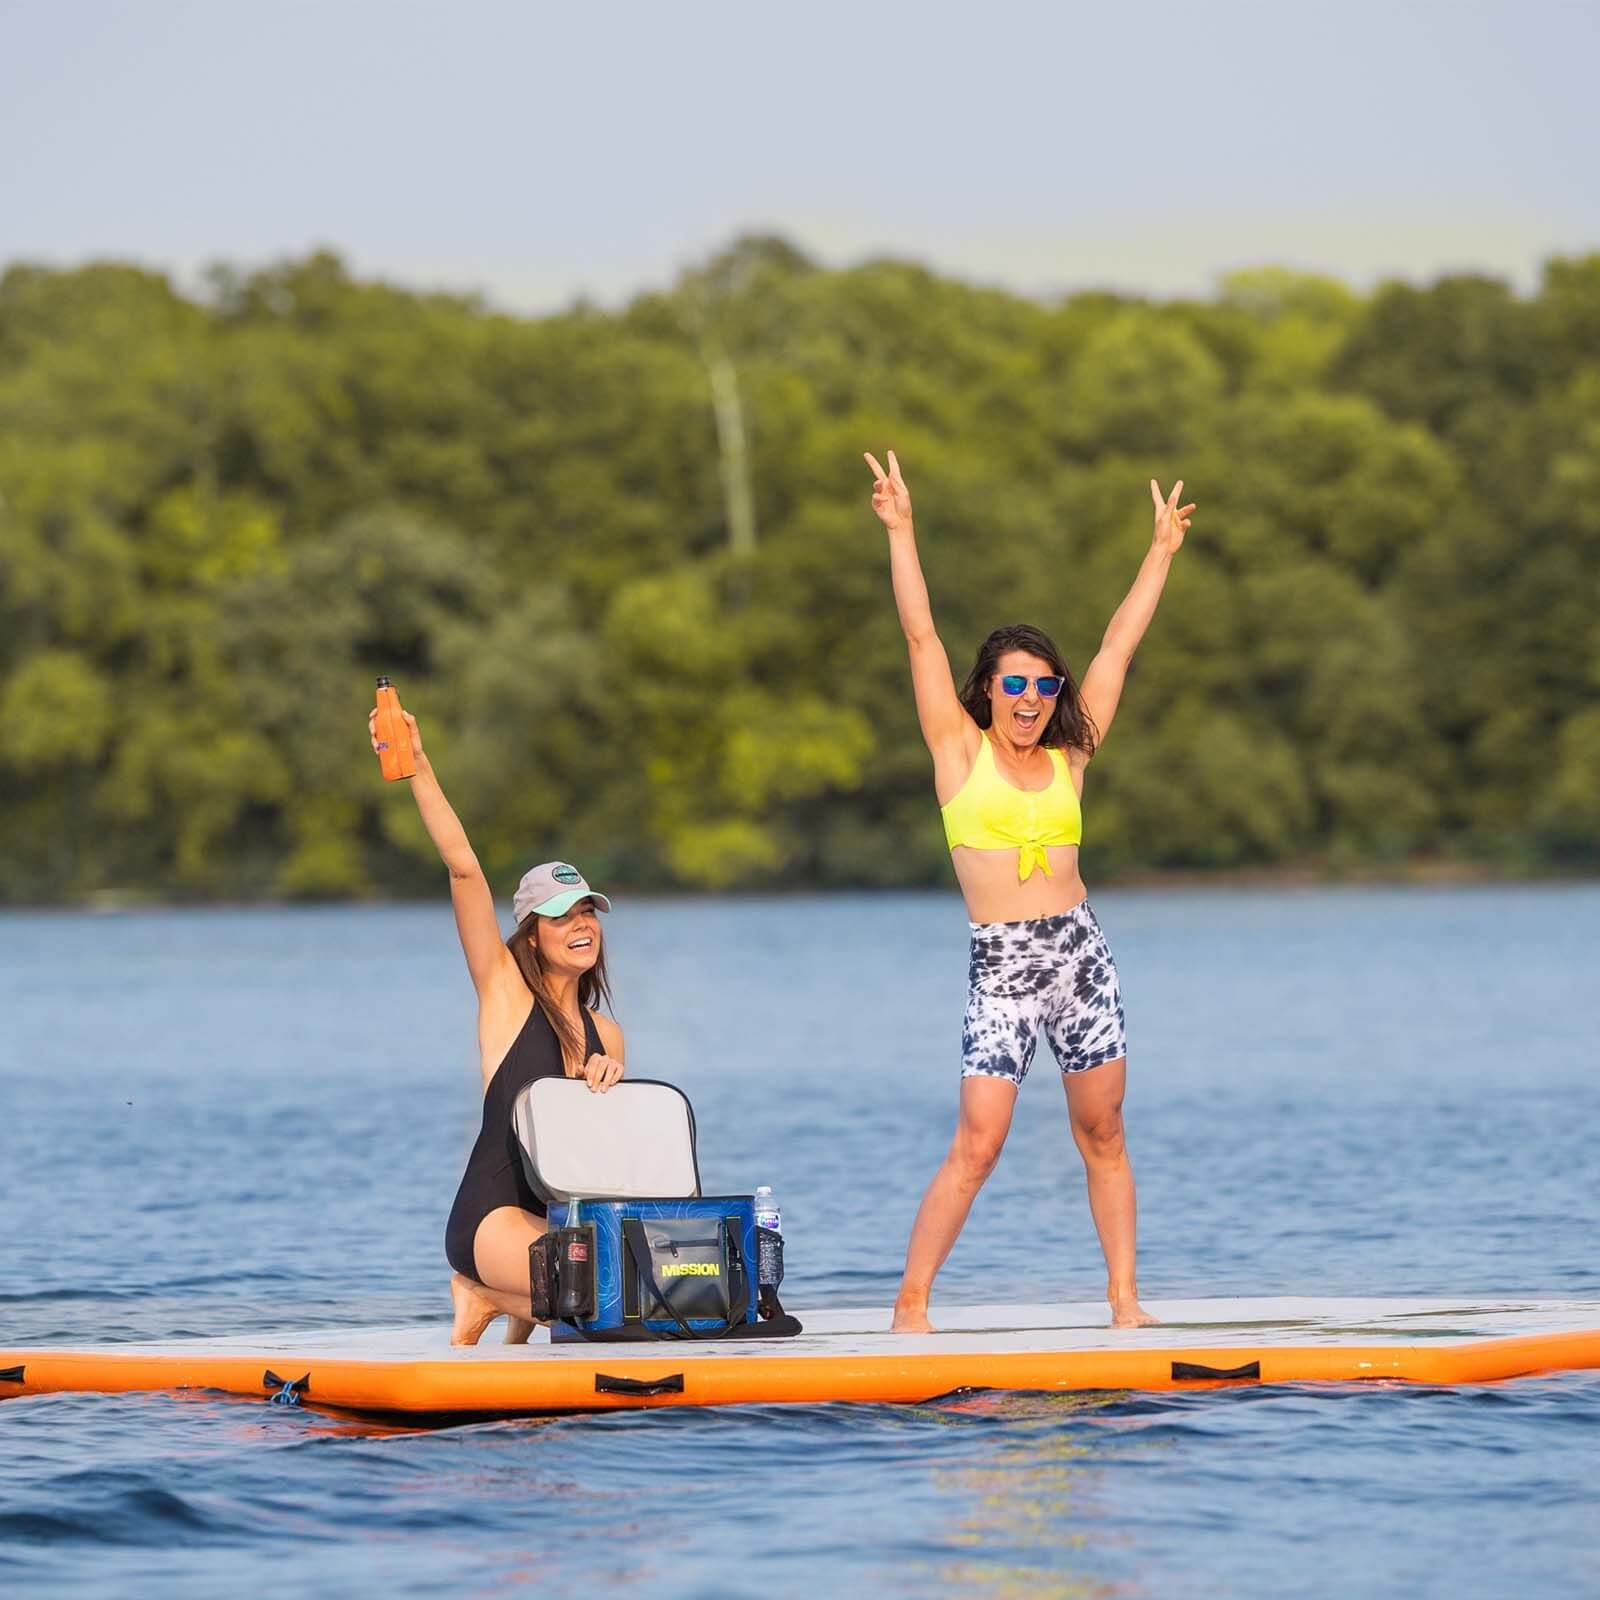 Two women enjoying a MISSION Reef Hex 112 Inflatable Water Mat-filled floating social life on an inflatable raft.